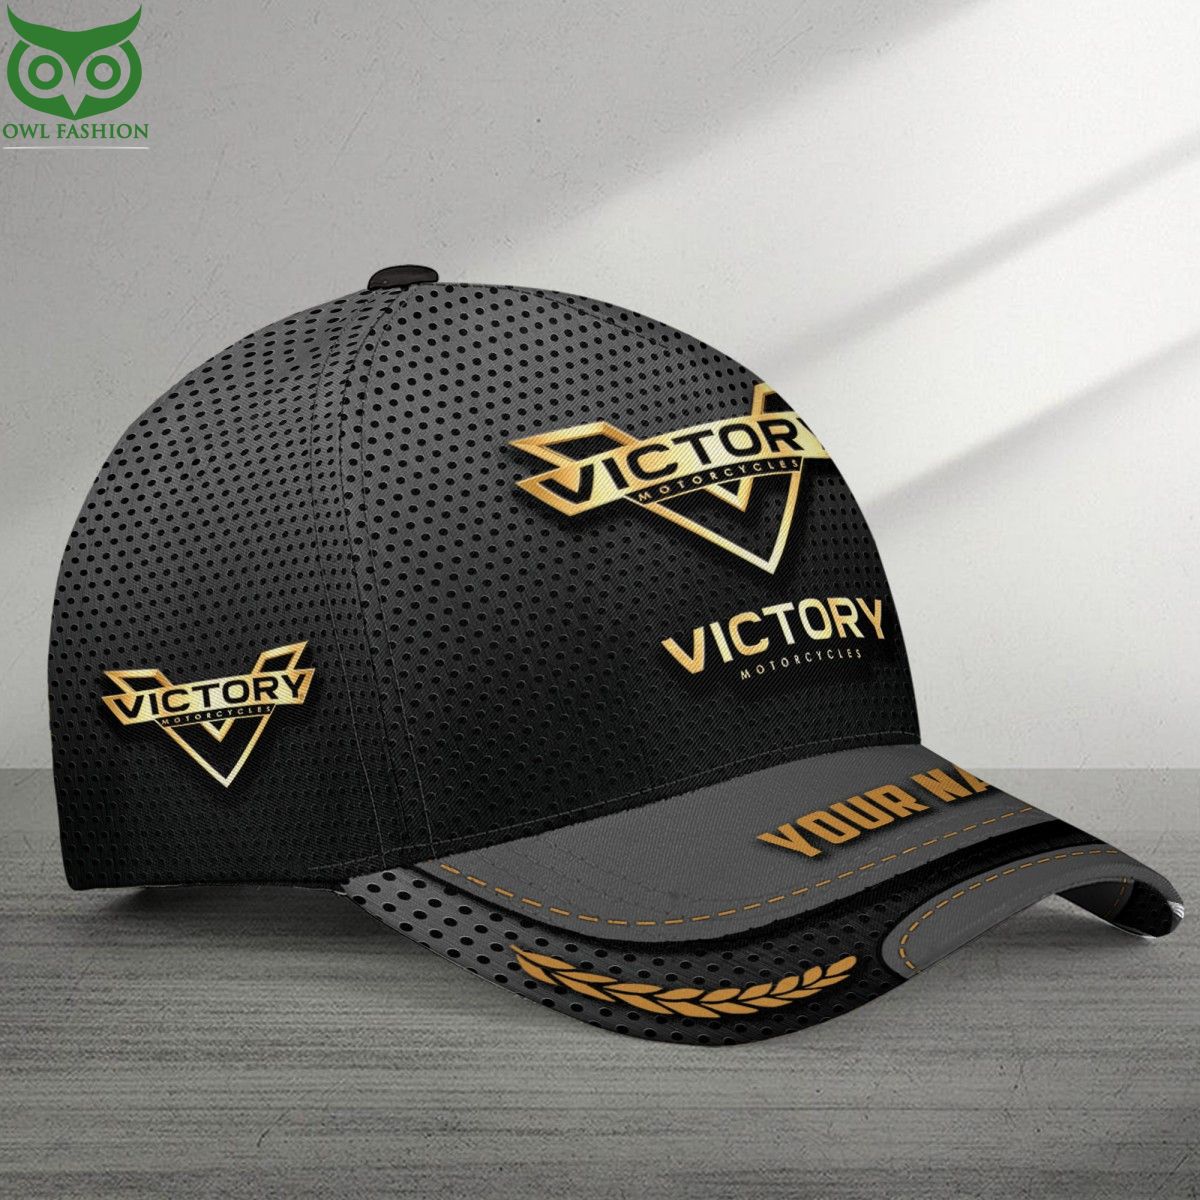 victory motorcycles luxury logo brand personalized classic cap 3 o8tjP.jpg